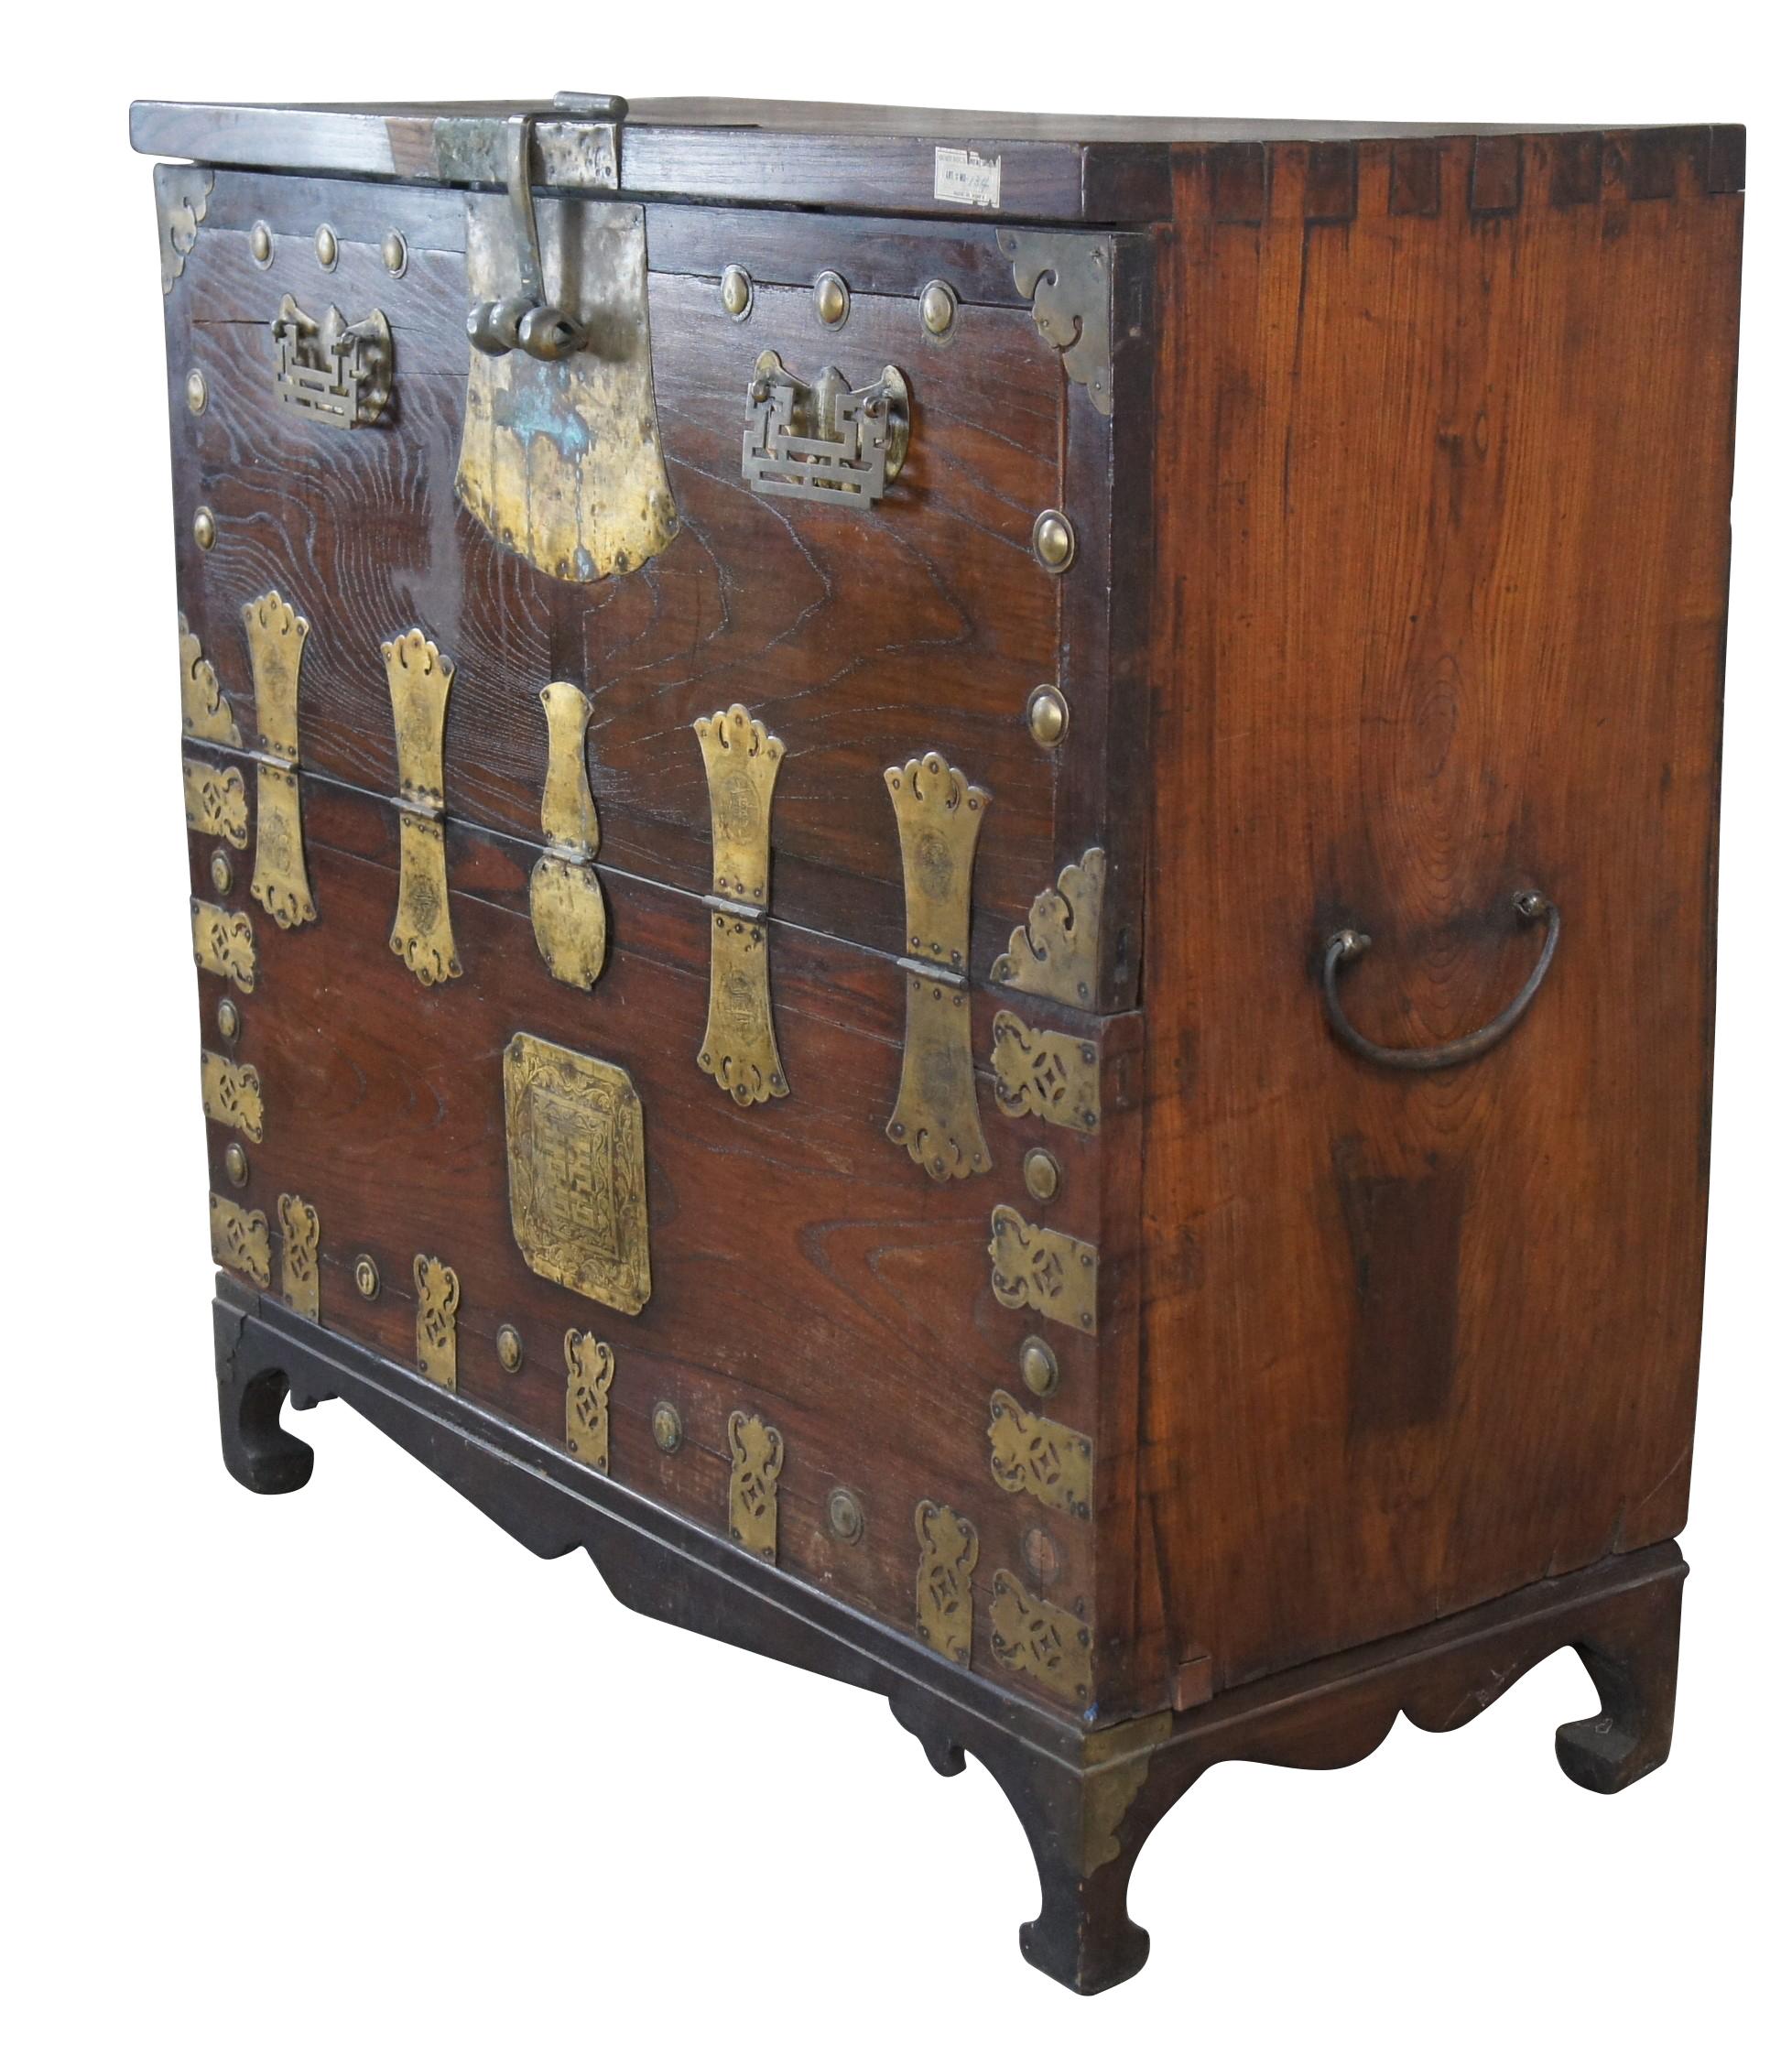 Antique Korean Bandaji chest on stand or trunk featuring Zelkova elm frame with brass accents. The Korean name bandaji (literally meaning 